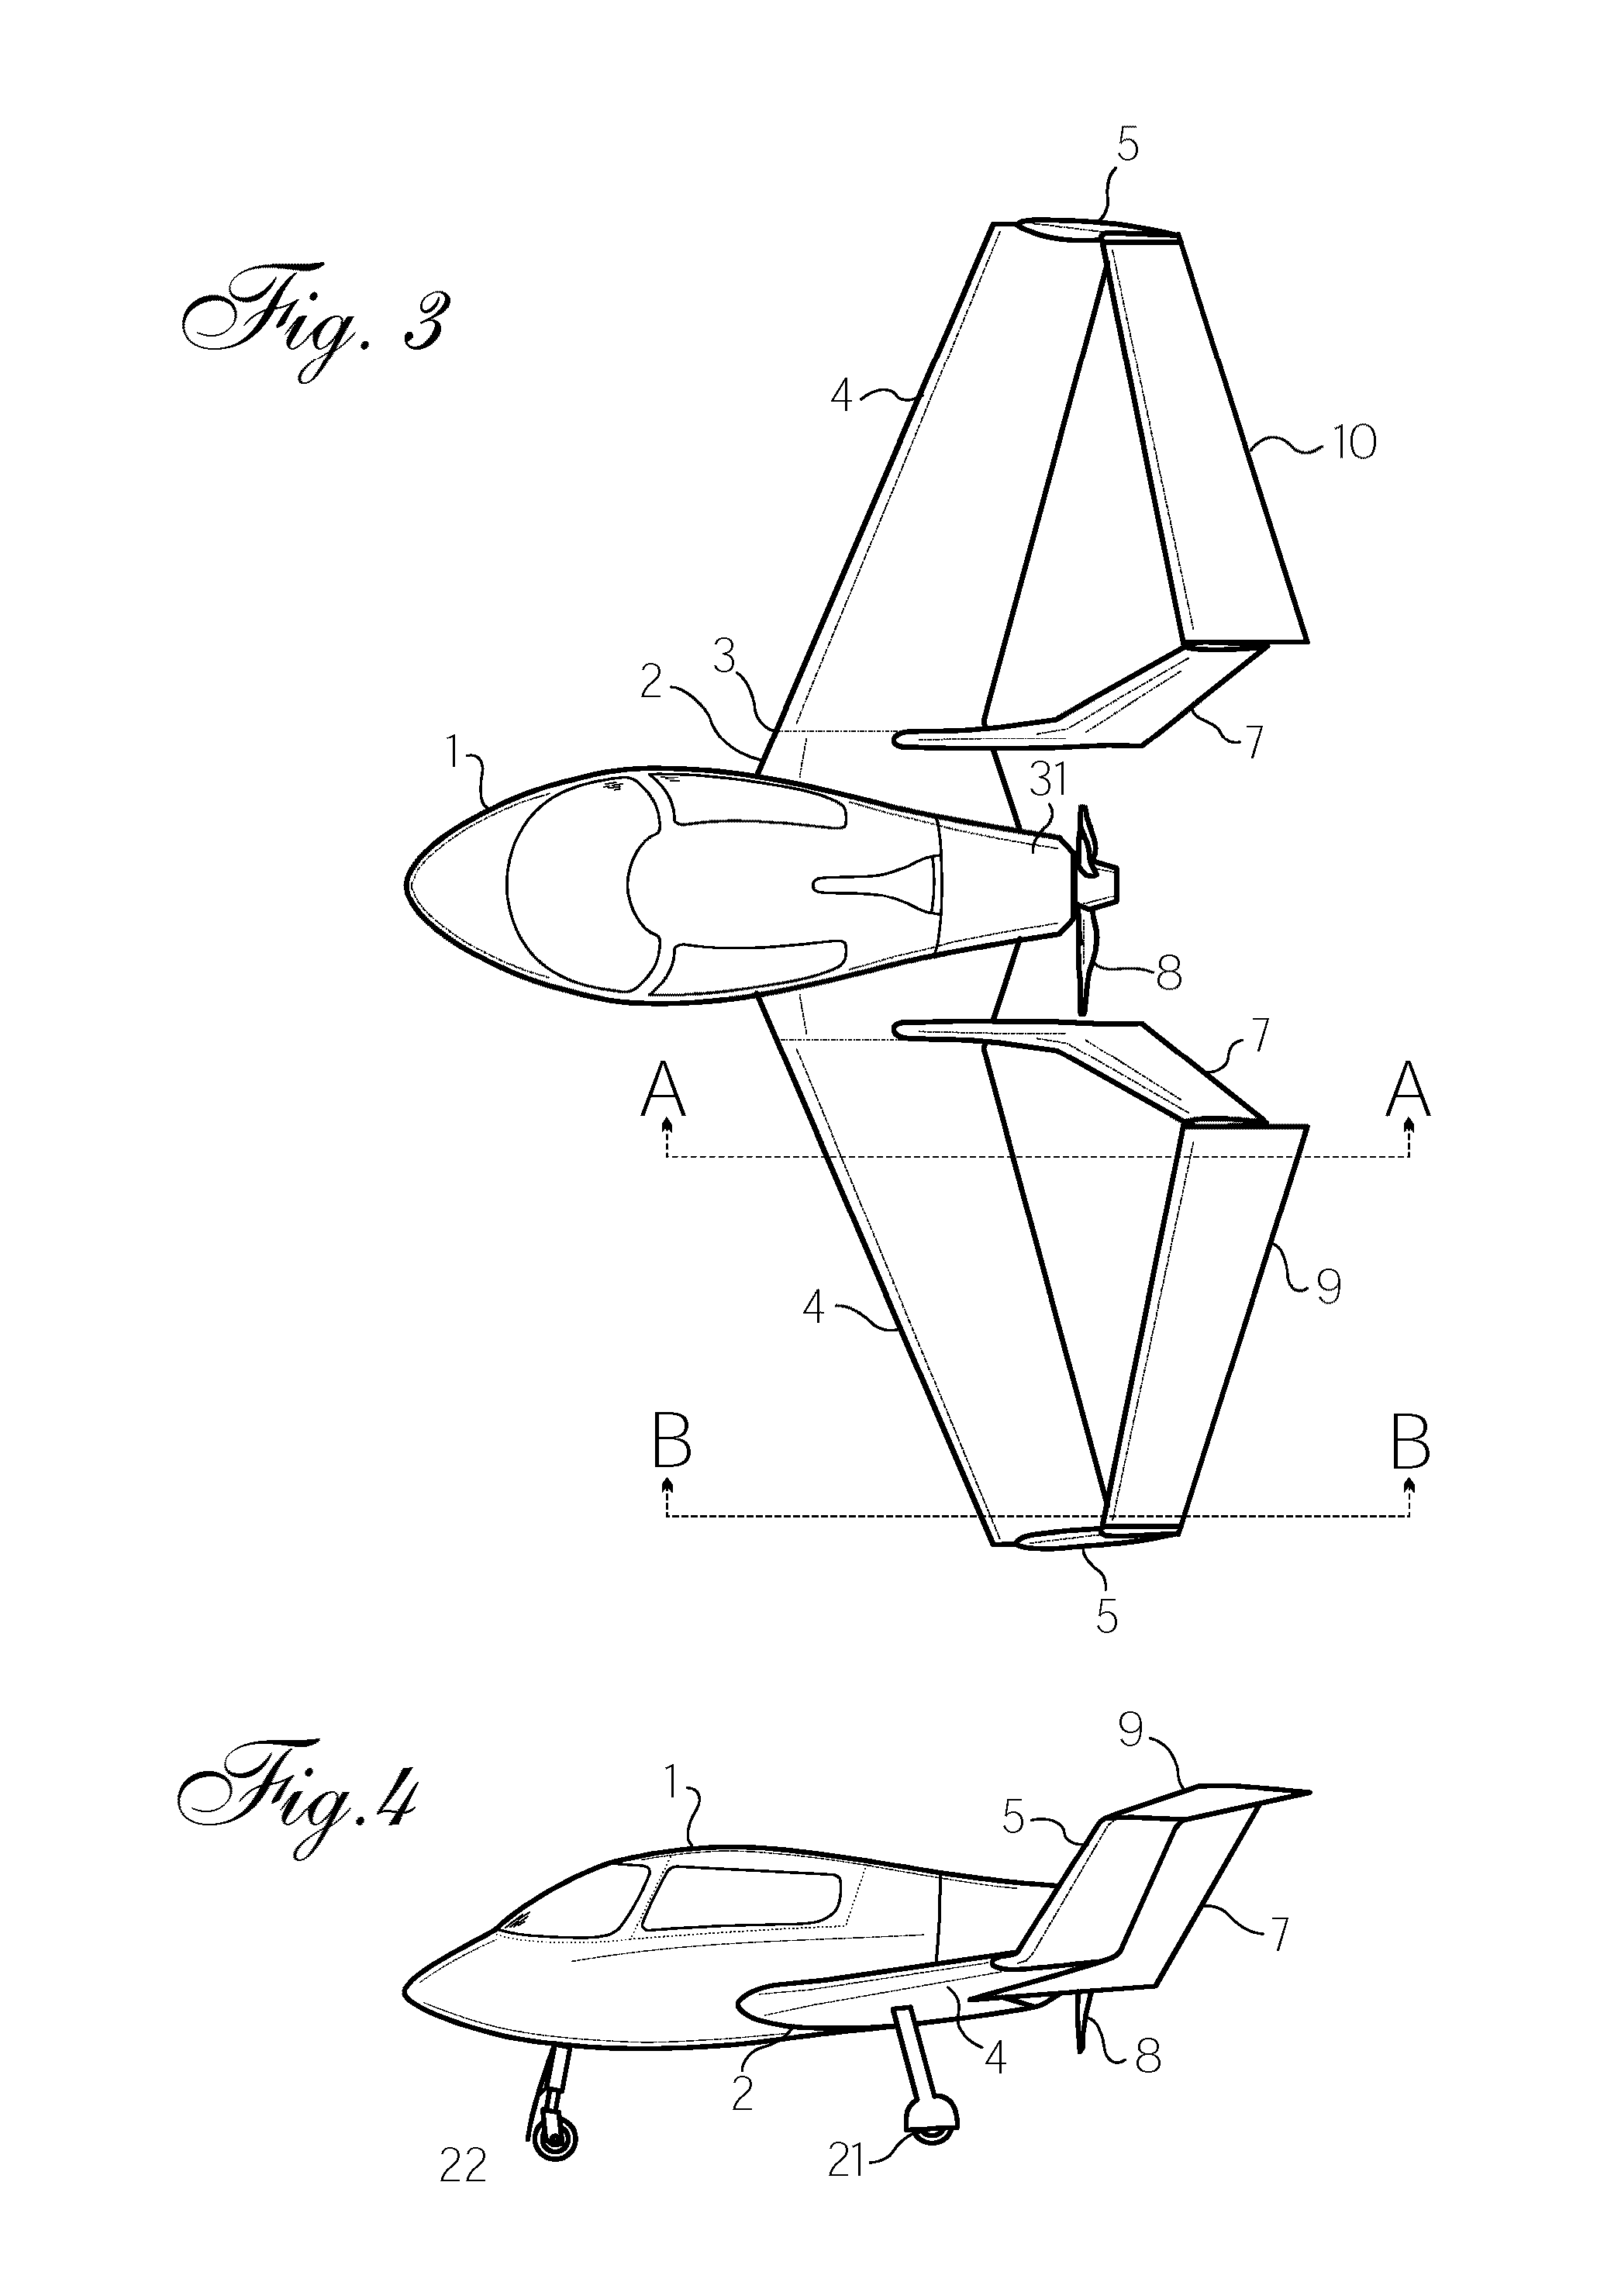 Aircraft stability and efficient control through induced drag reduction